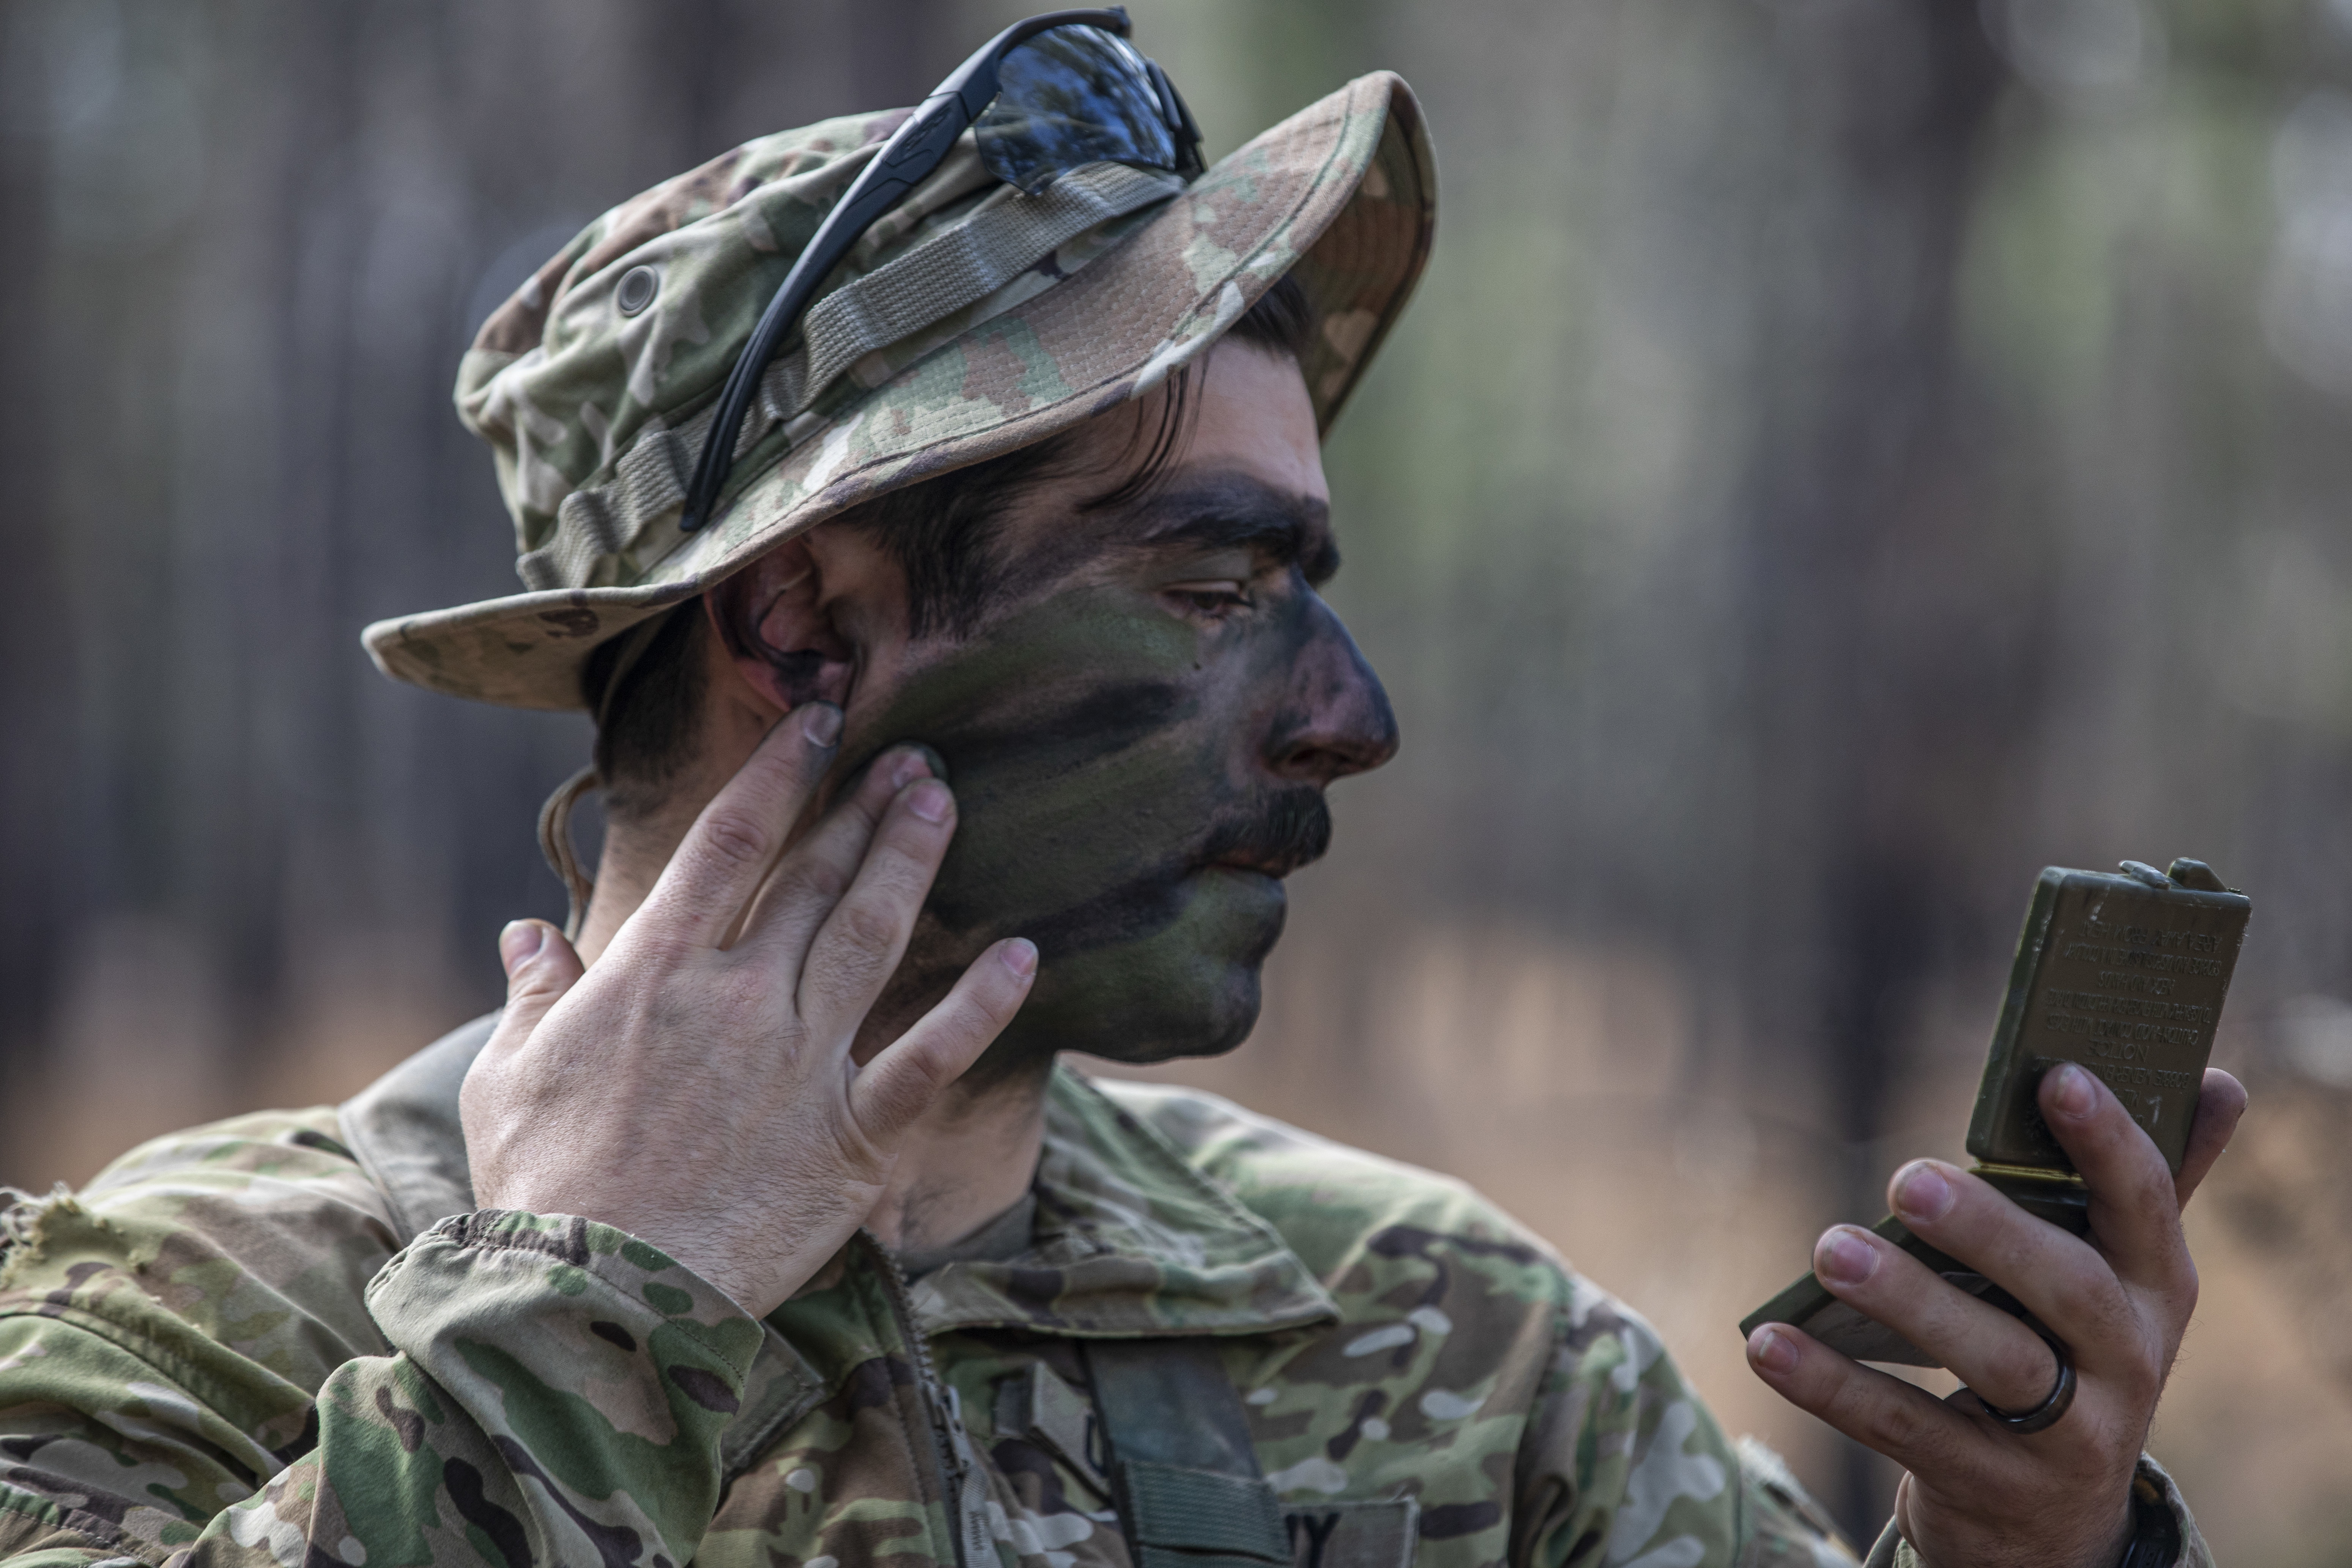 Blast-Resistant/Heat-Resistant Camouflage Face Paint Developed for U.S.  Military Infantry Warfighters: Will the New Camo Face Paint Incorporate  Thermal/IR (Infrared) Camouflage Aspect? –  (DR): An  online tactical technology and